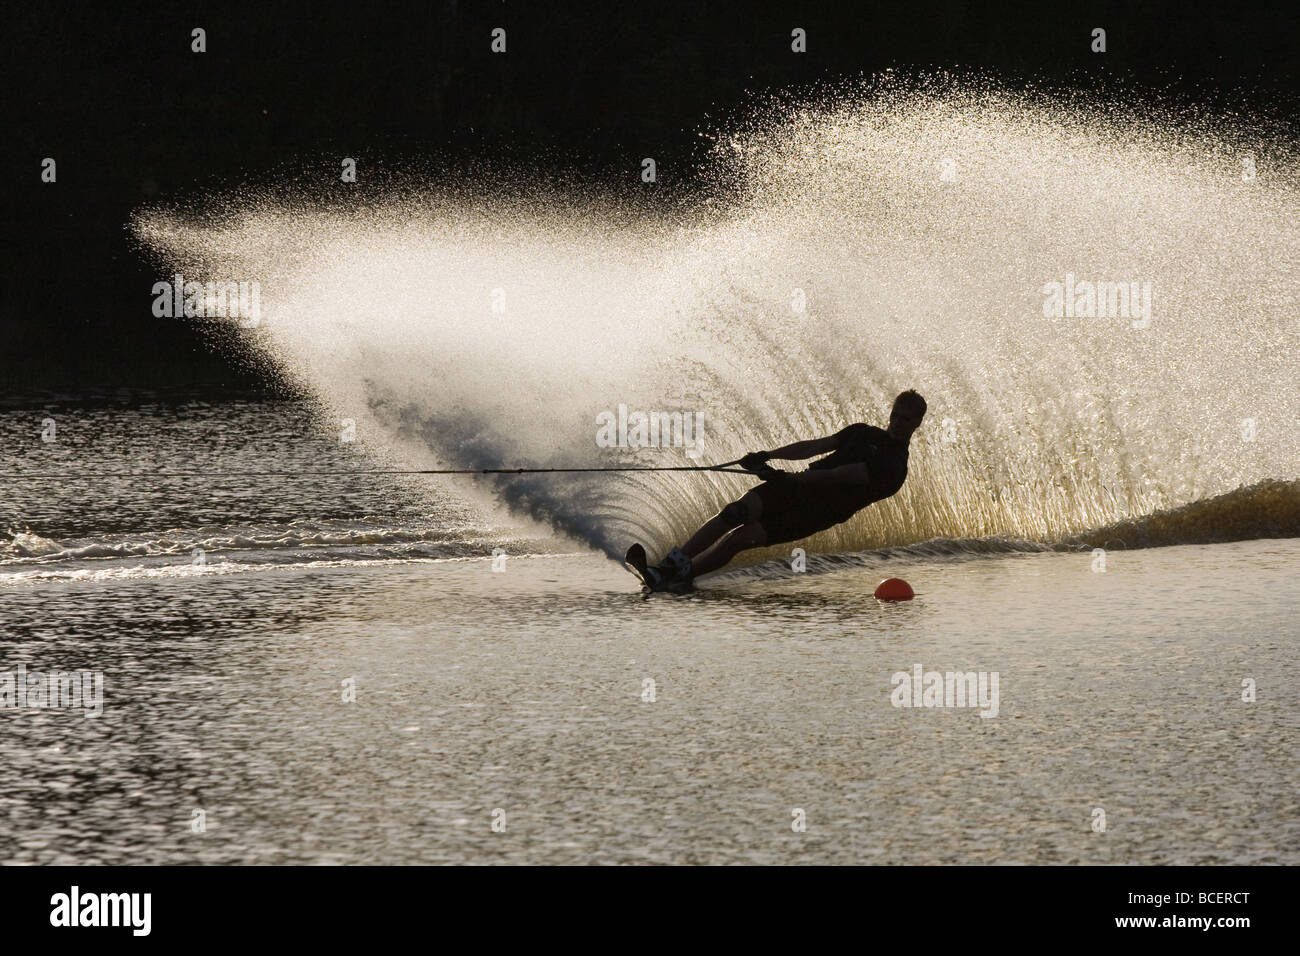 A man practicing water ski slalom in a lake in Sweden Stock Photo